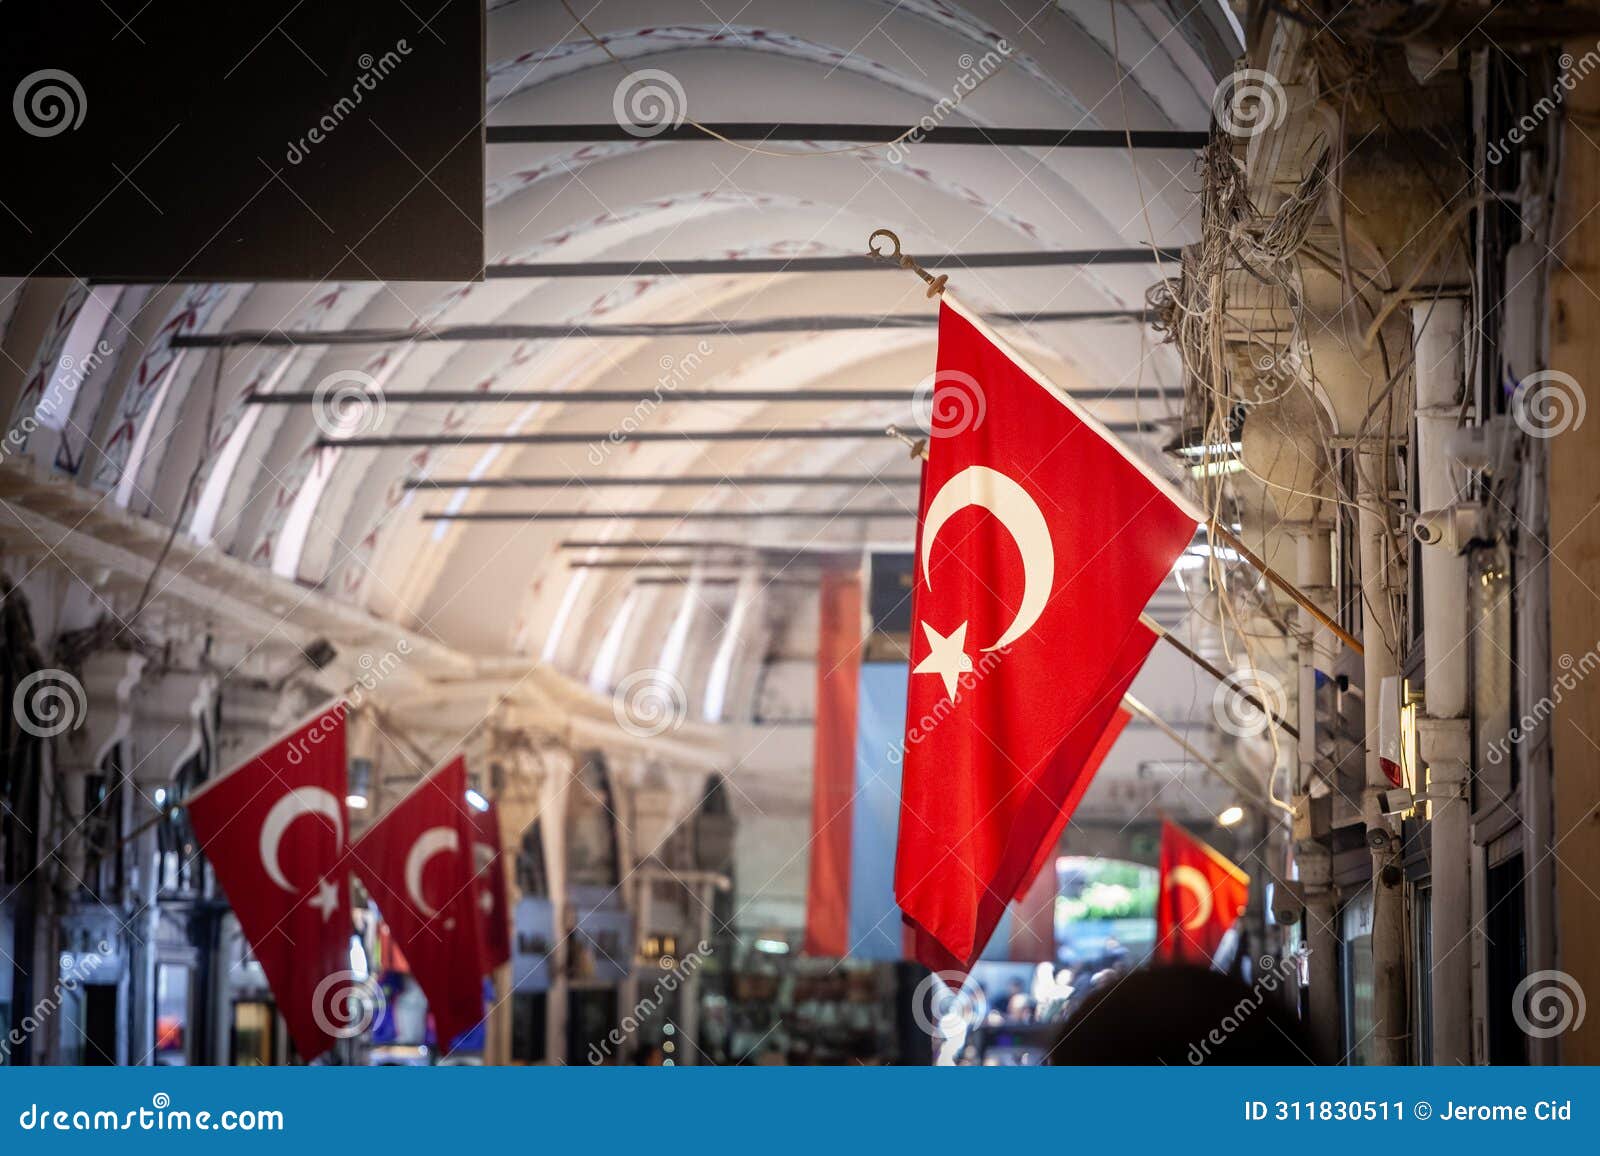 selective blur on turkish flags hung in the grand bazaar. also known as kapalicarsi, it is one of the main landmarks and touristic